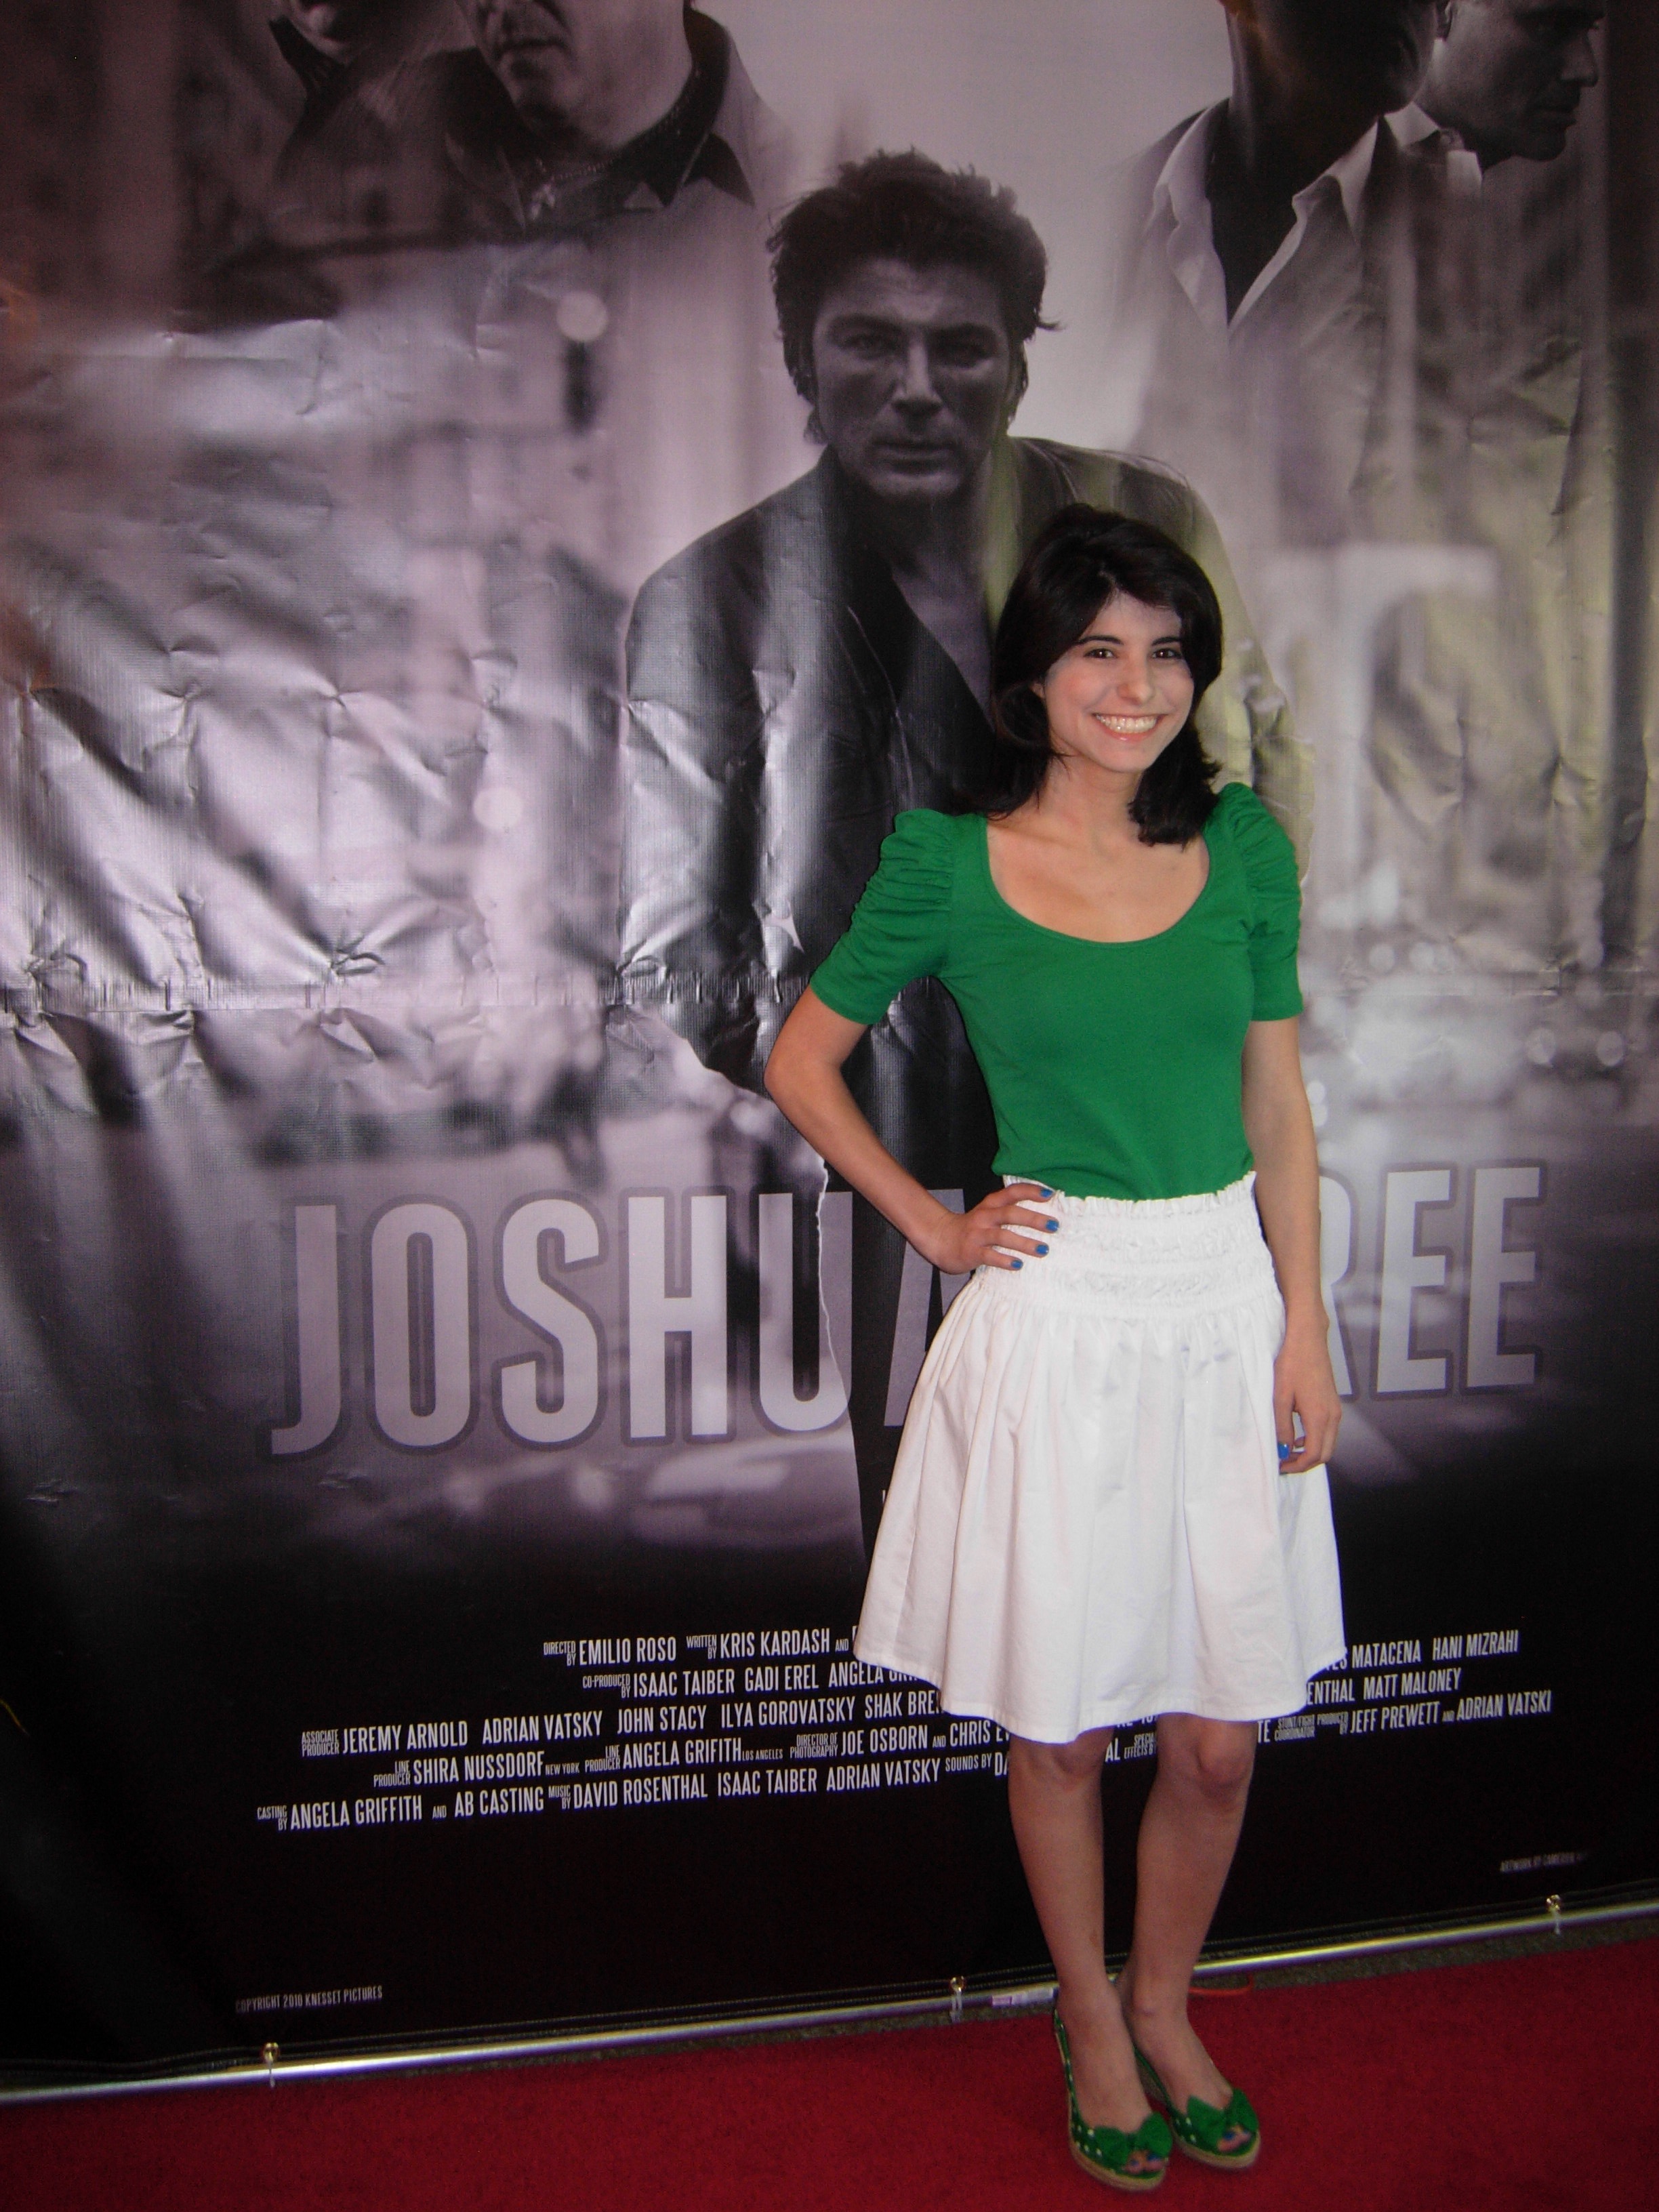 Romina at the Joshua Tree red carpet event.